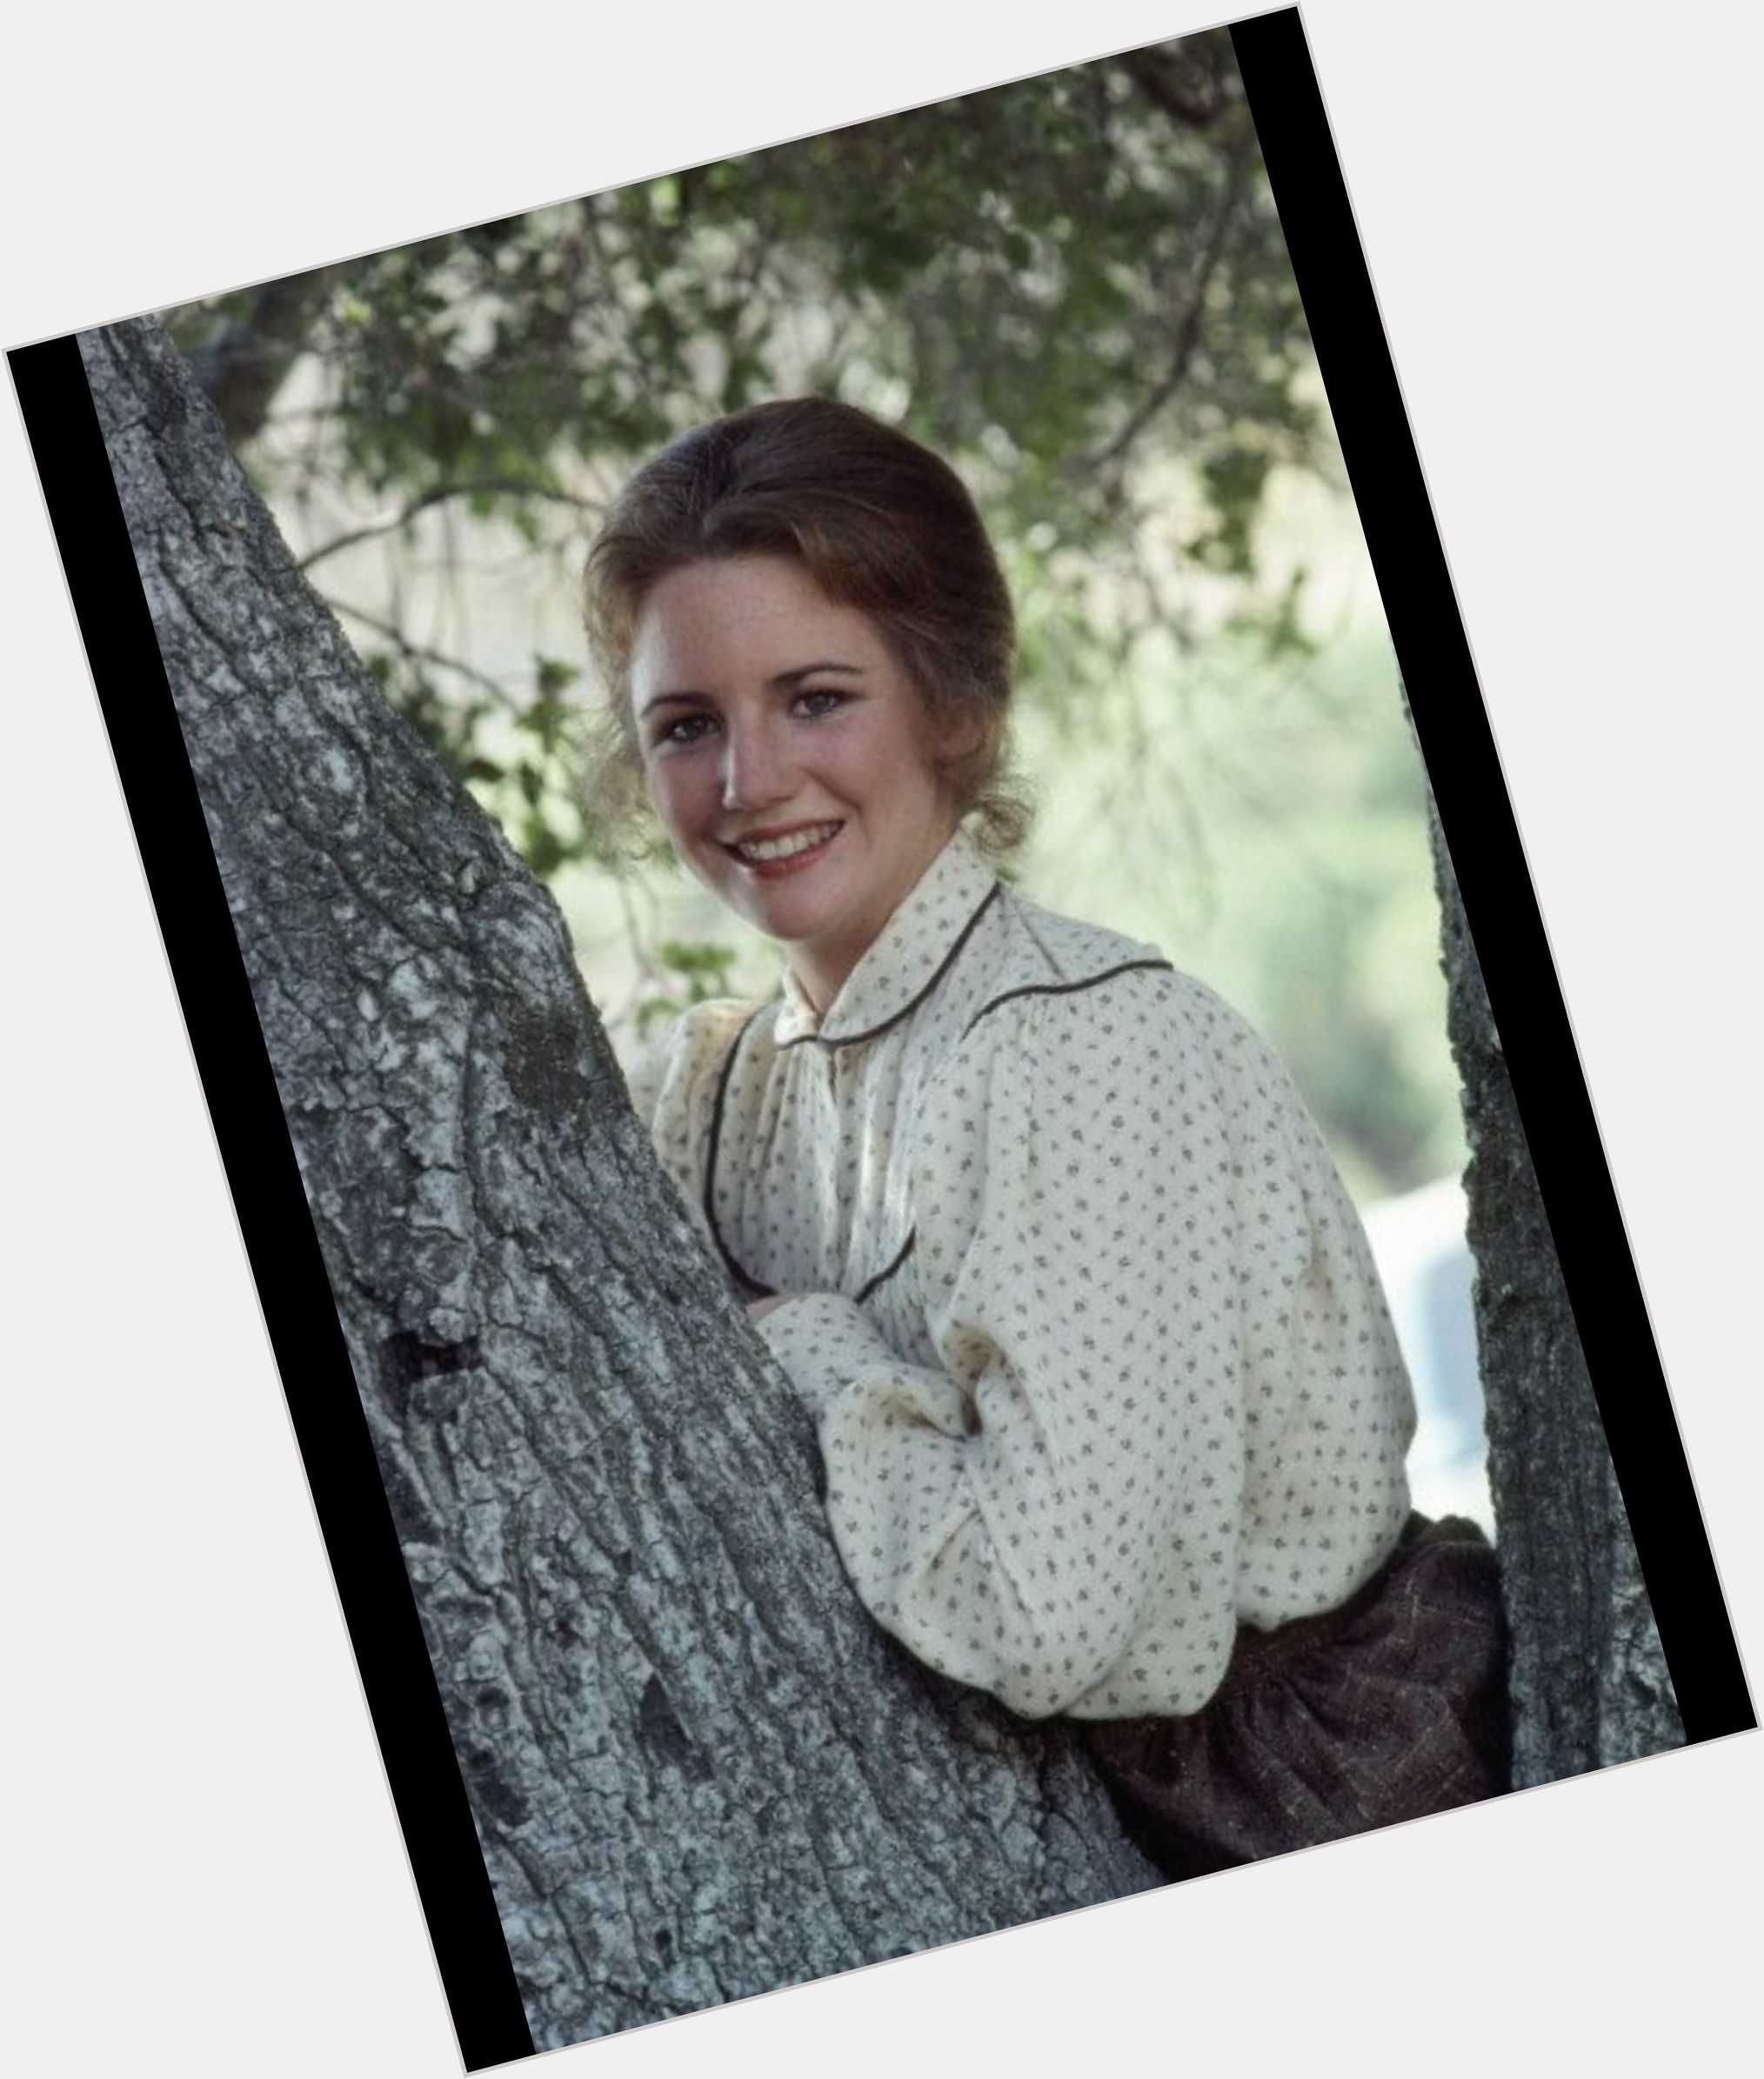 <a href="/hot-women/laura-ingalls/is-she-wilder-real-person">Laura Ingalls</a>  